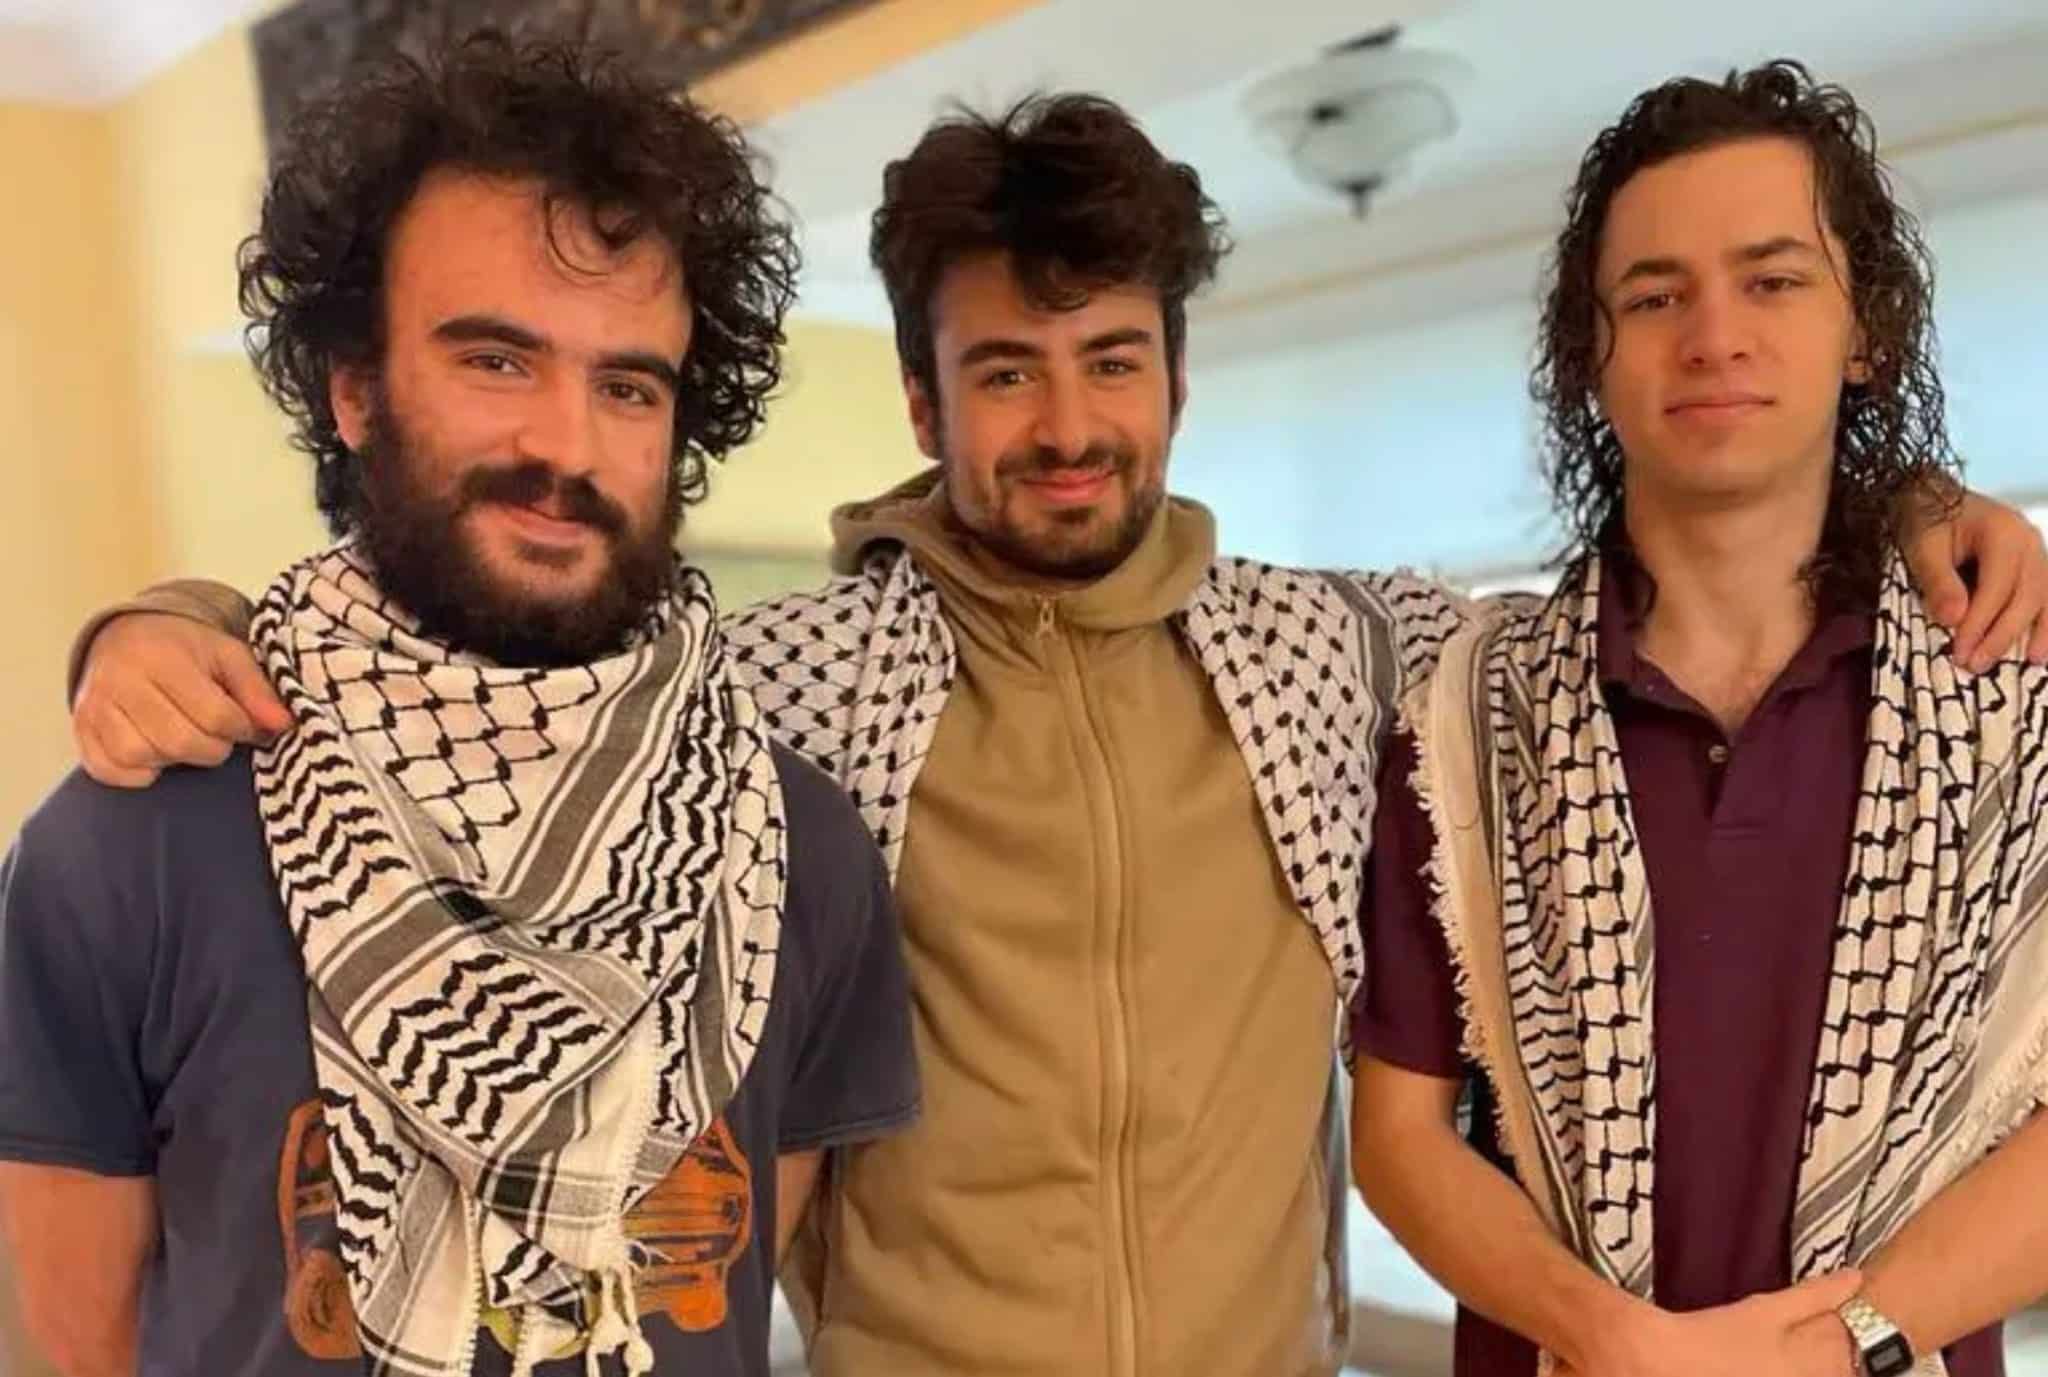 Palestinian college students Hisham Awartani, Tahseen Ali and Kenan Abdalhamid are pictured.